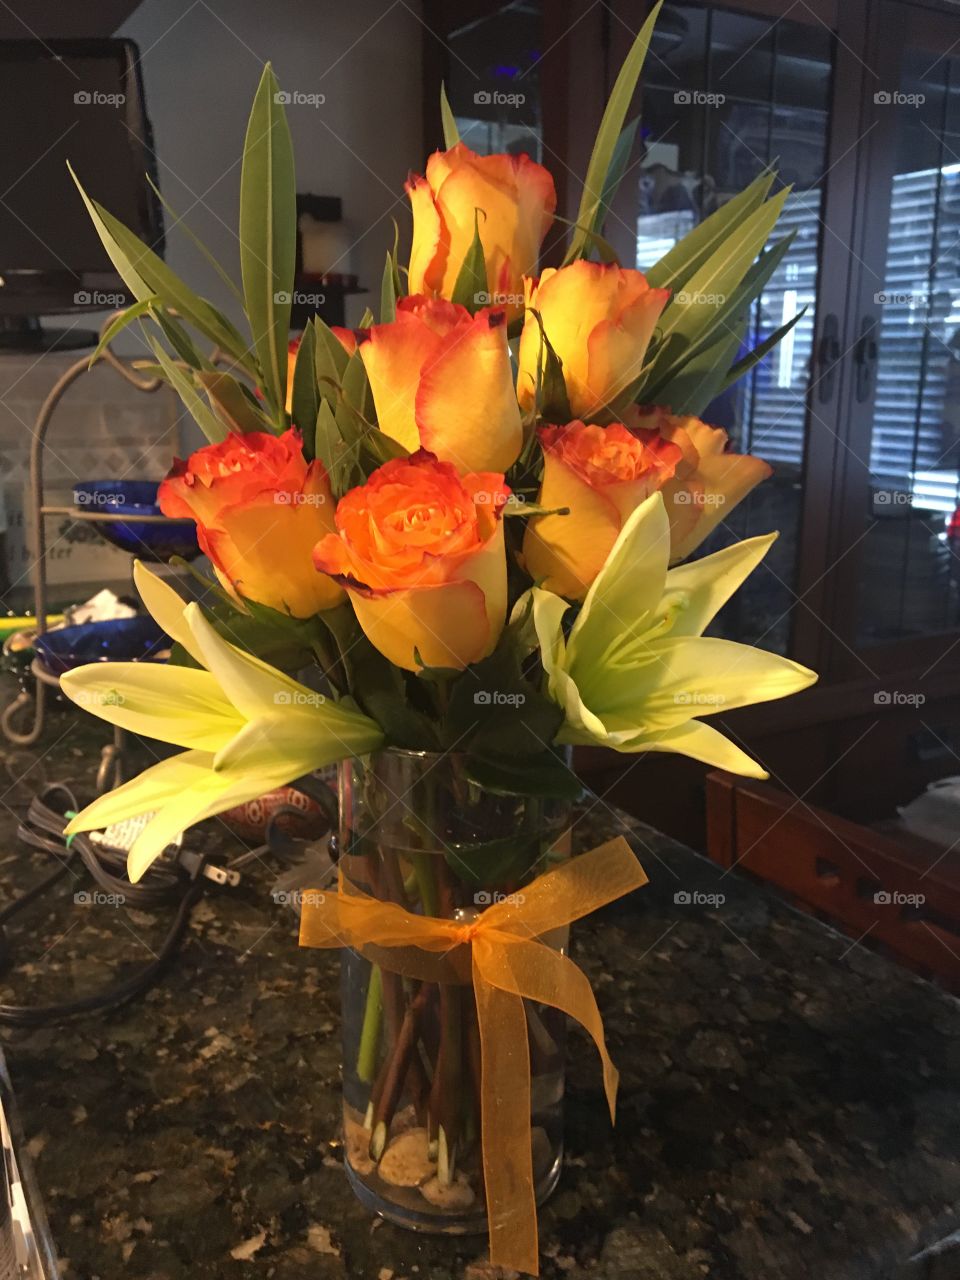 High and magic roses with yellow lilies!